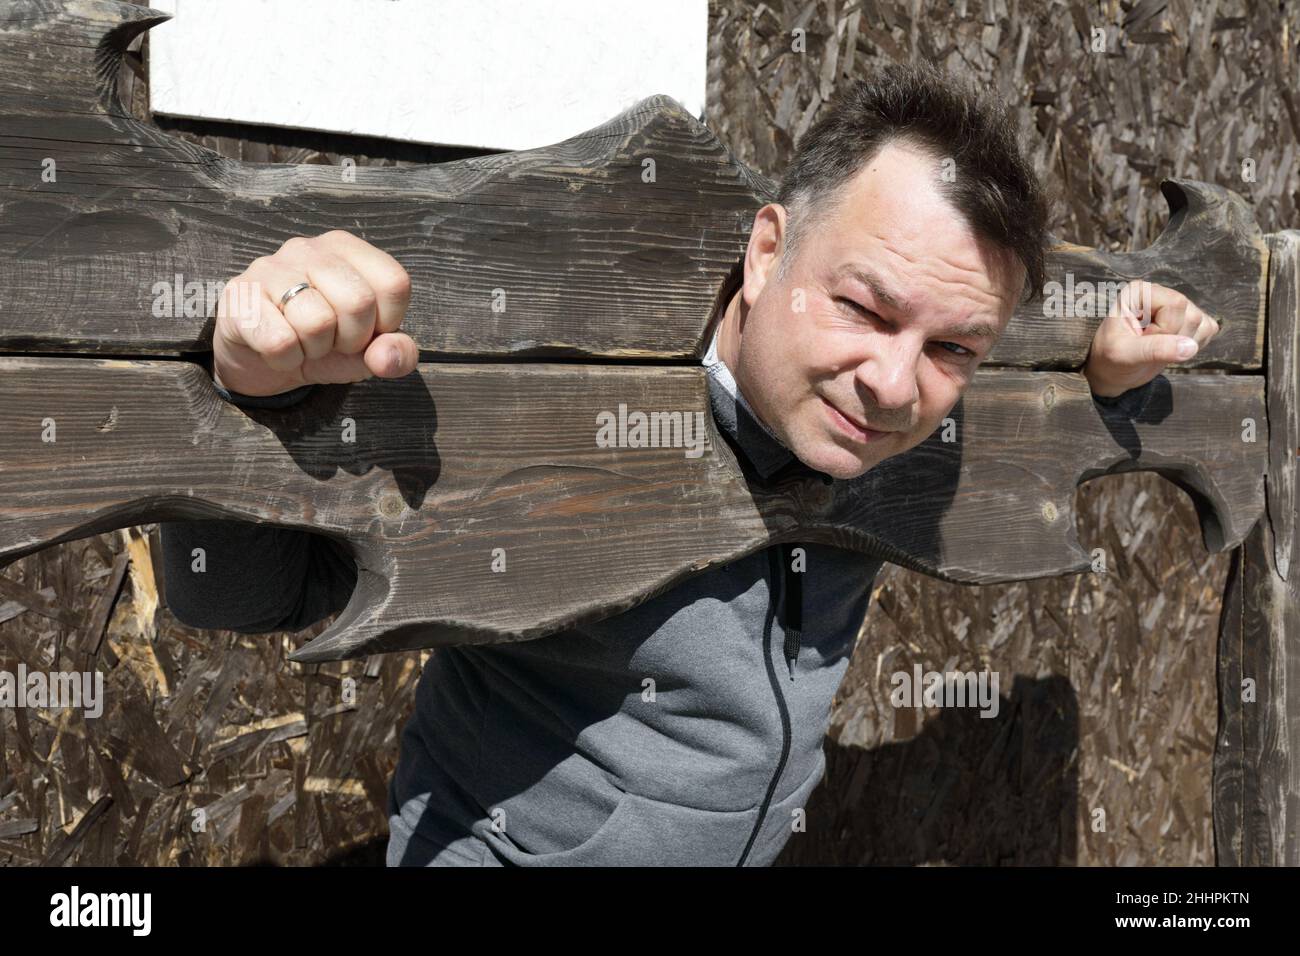 Portrait of unhappy man in wooden pillory outdoor Stock Photo